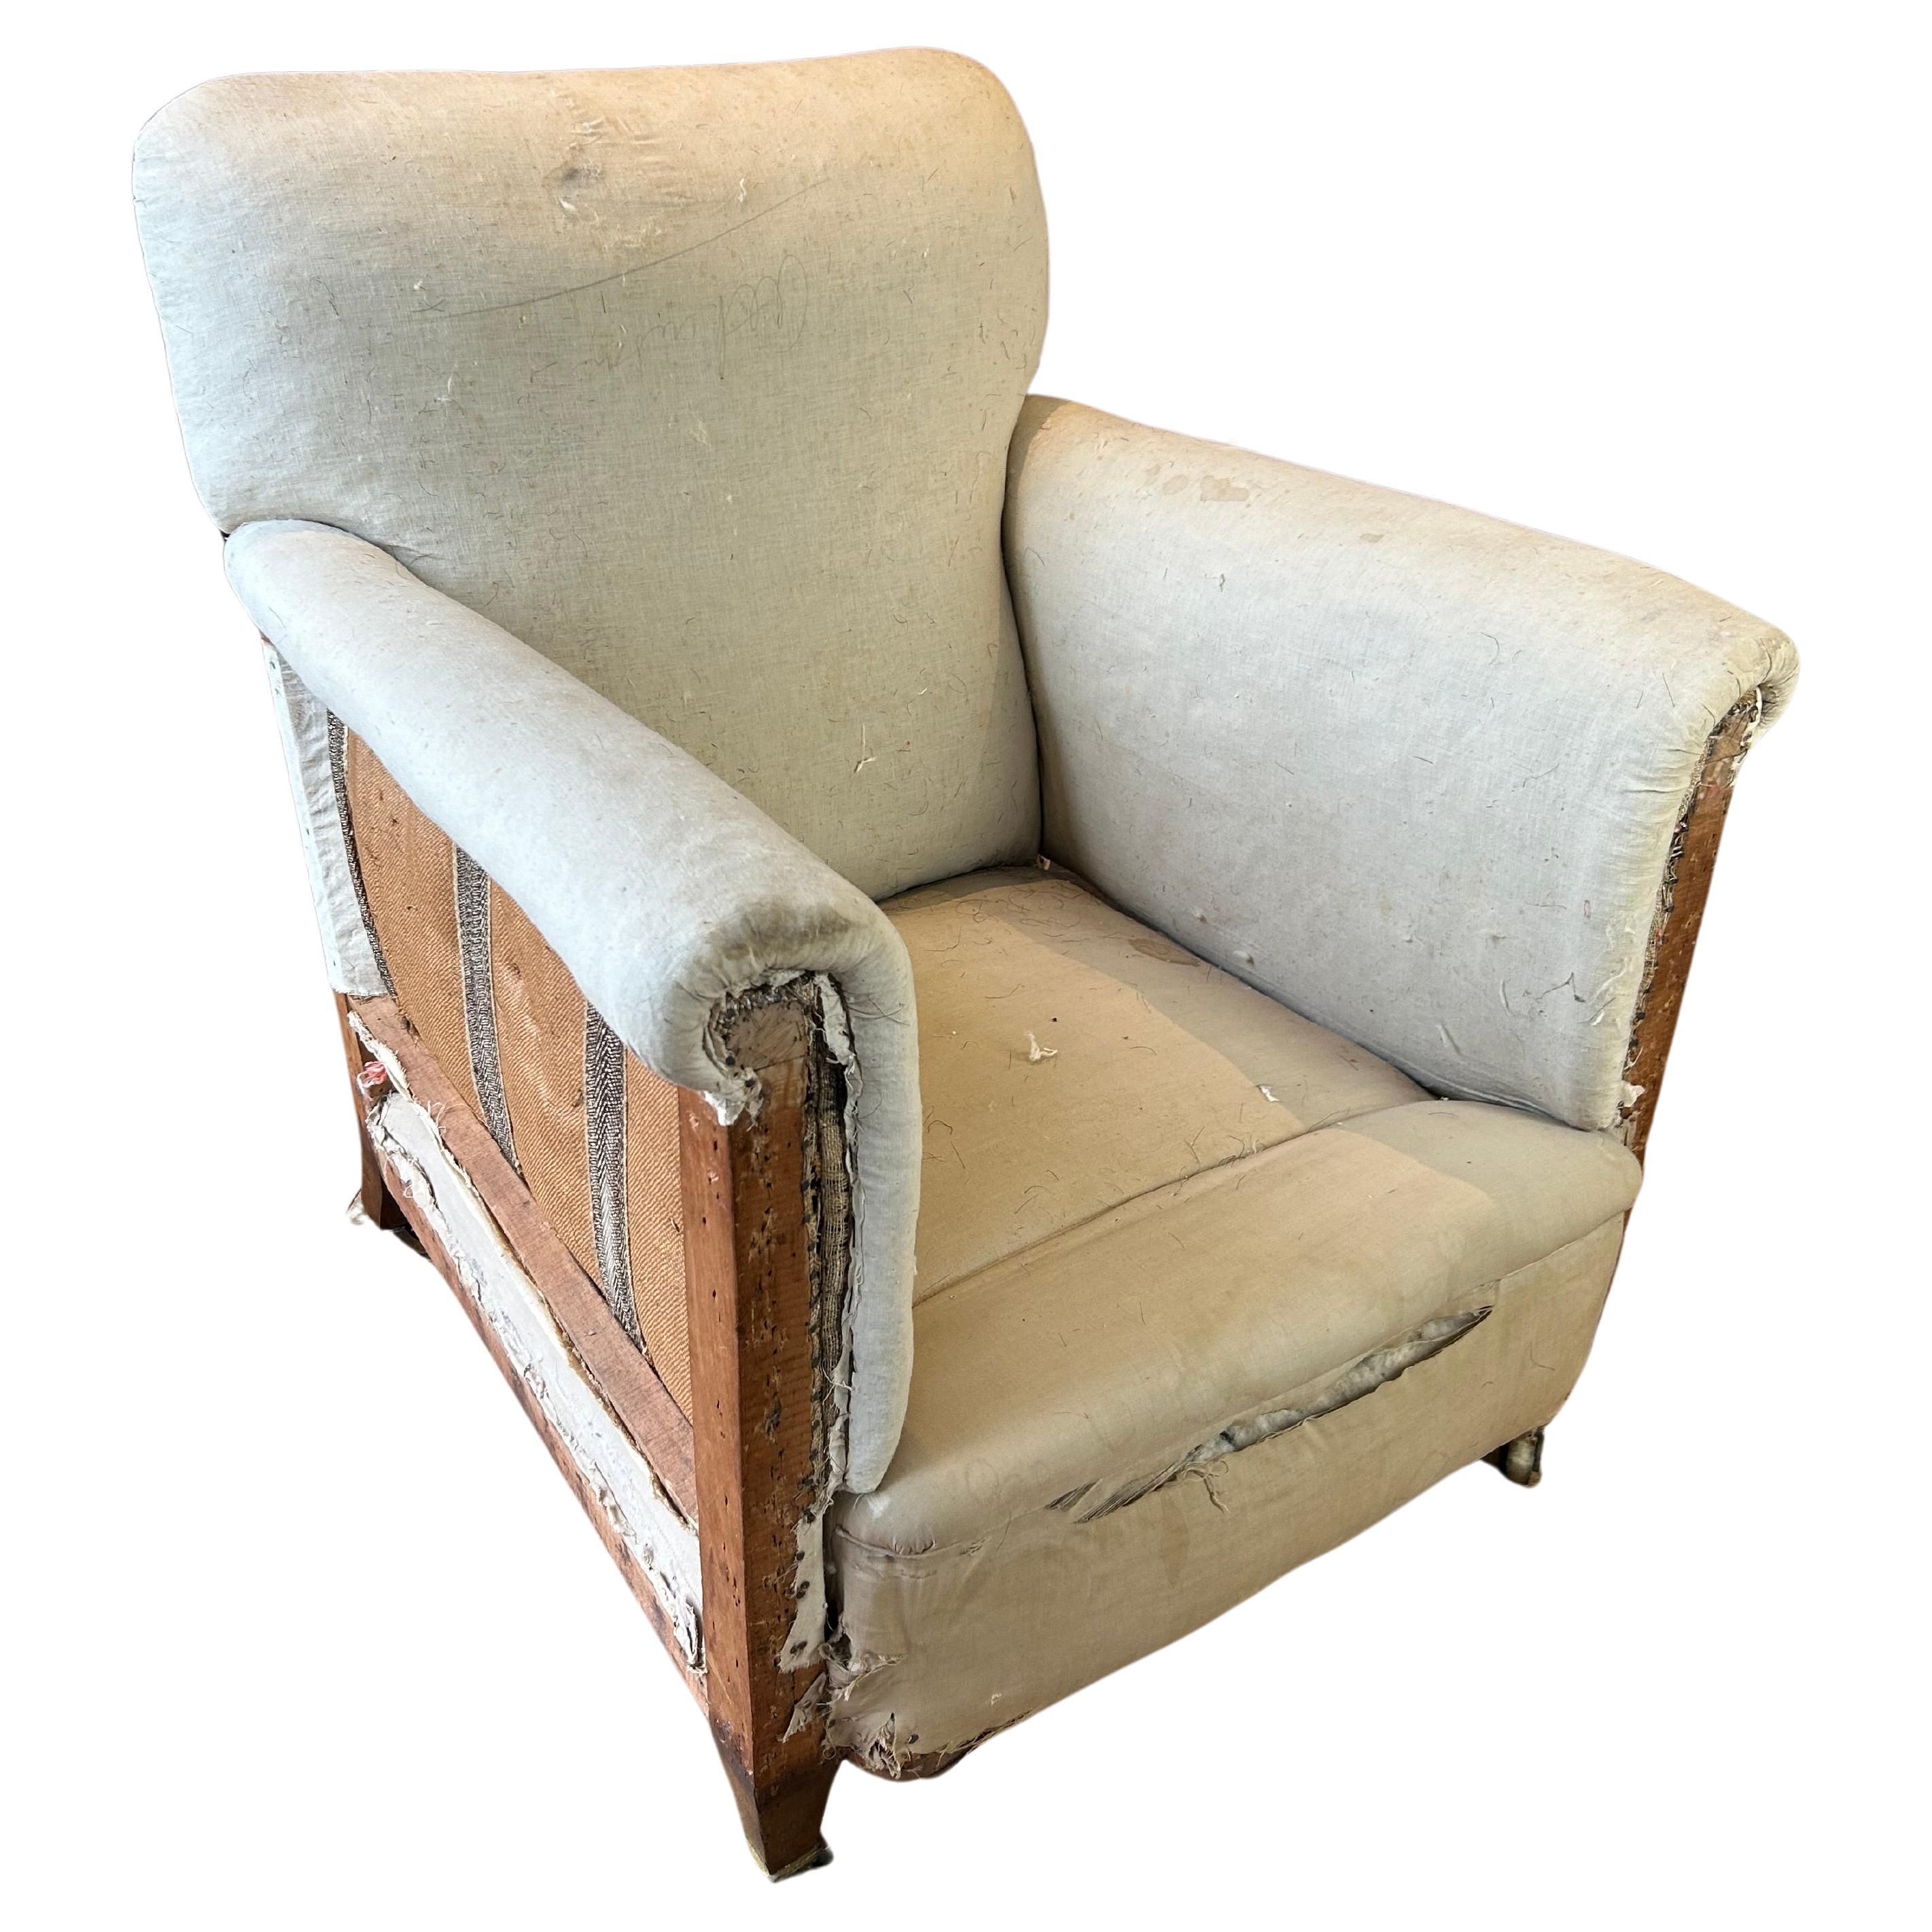 William Birch Stamped Upholstered English Armchair, circa 1890